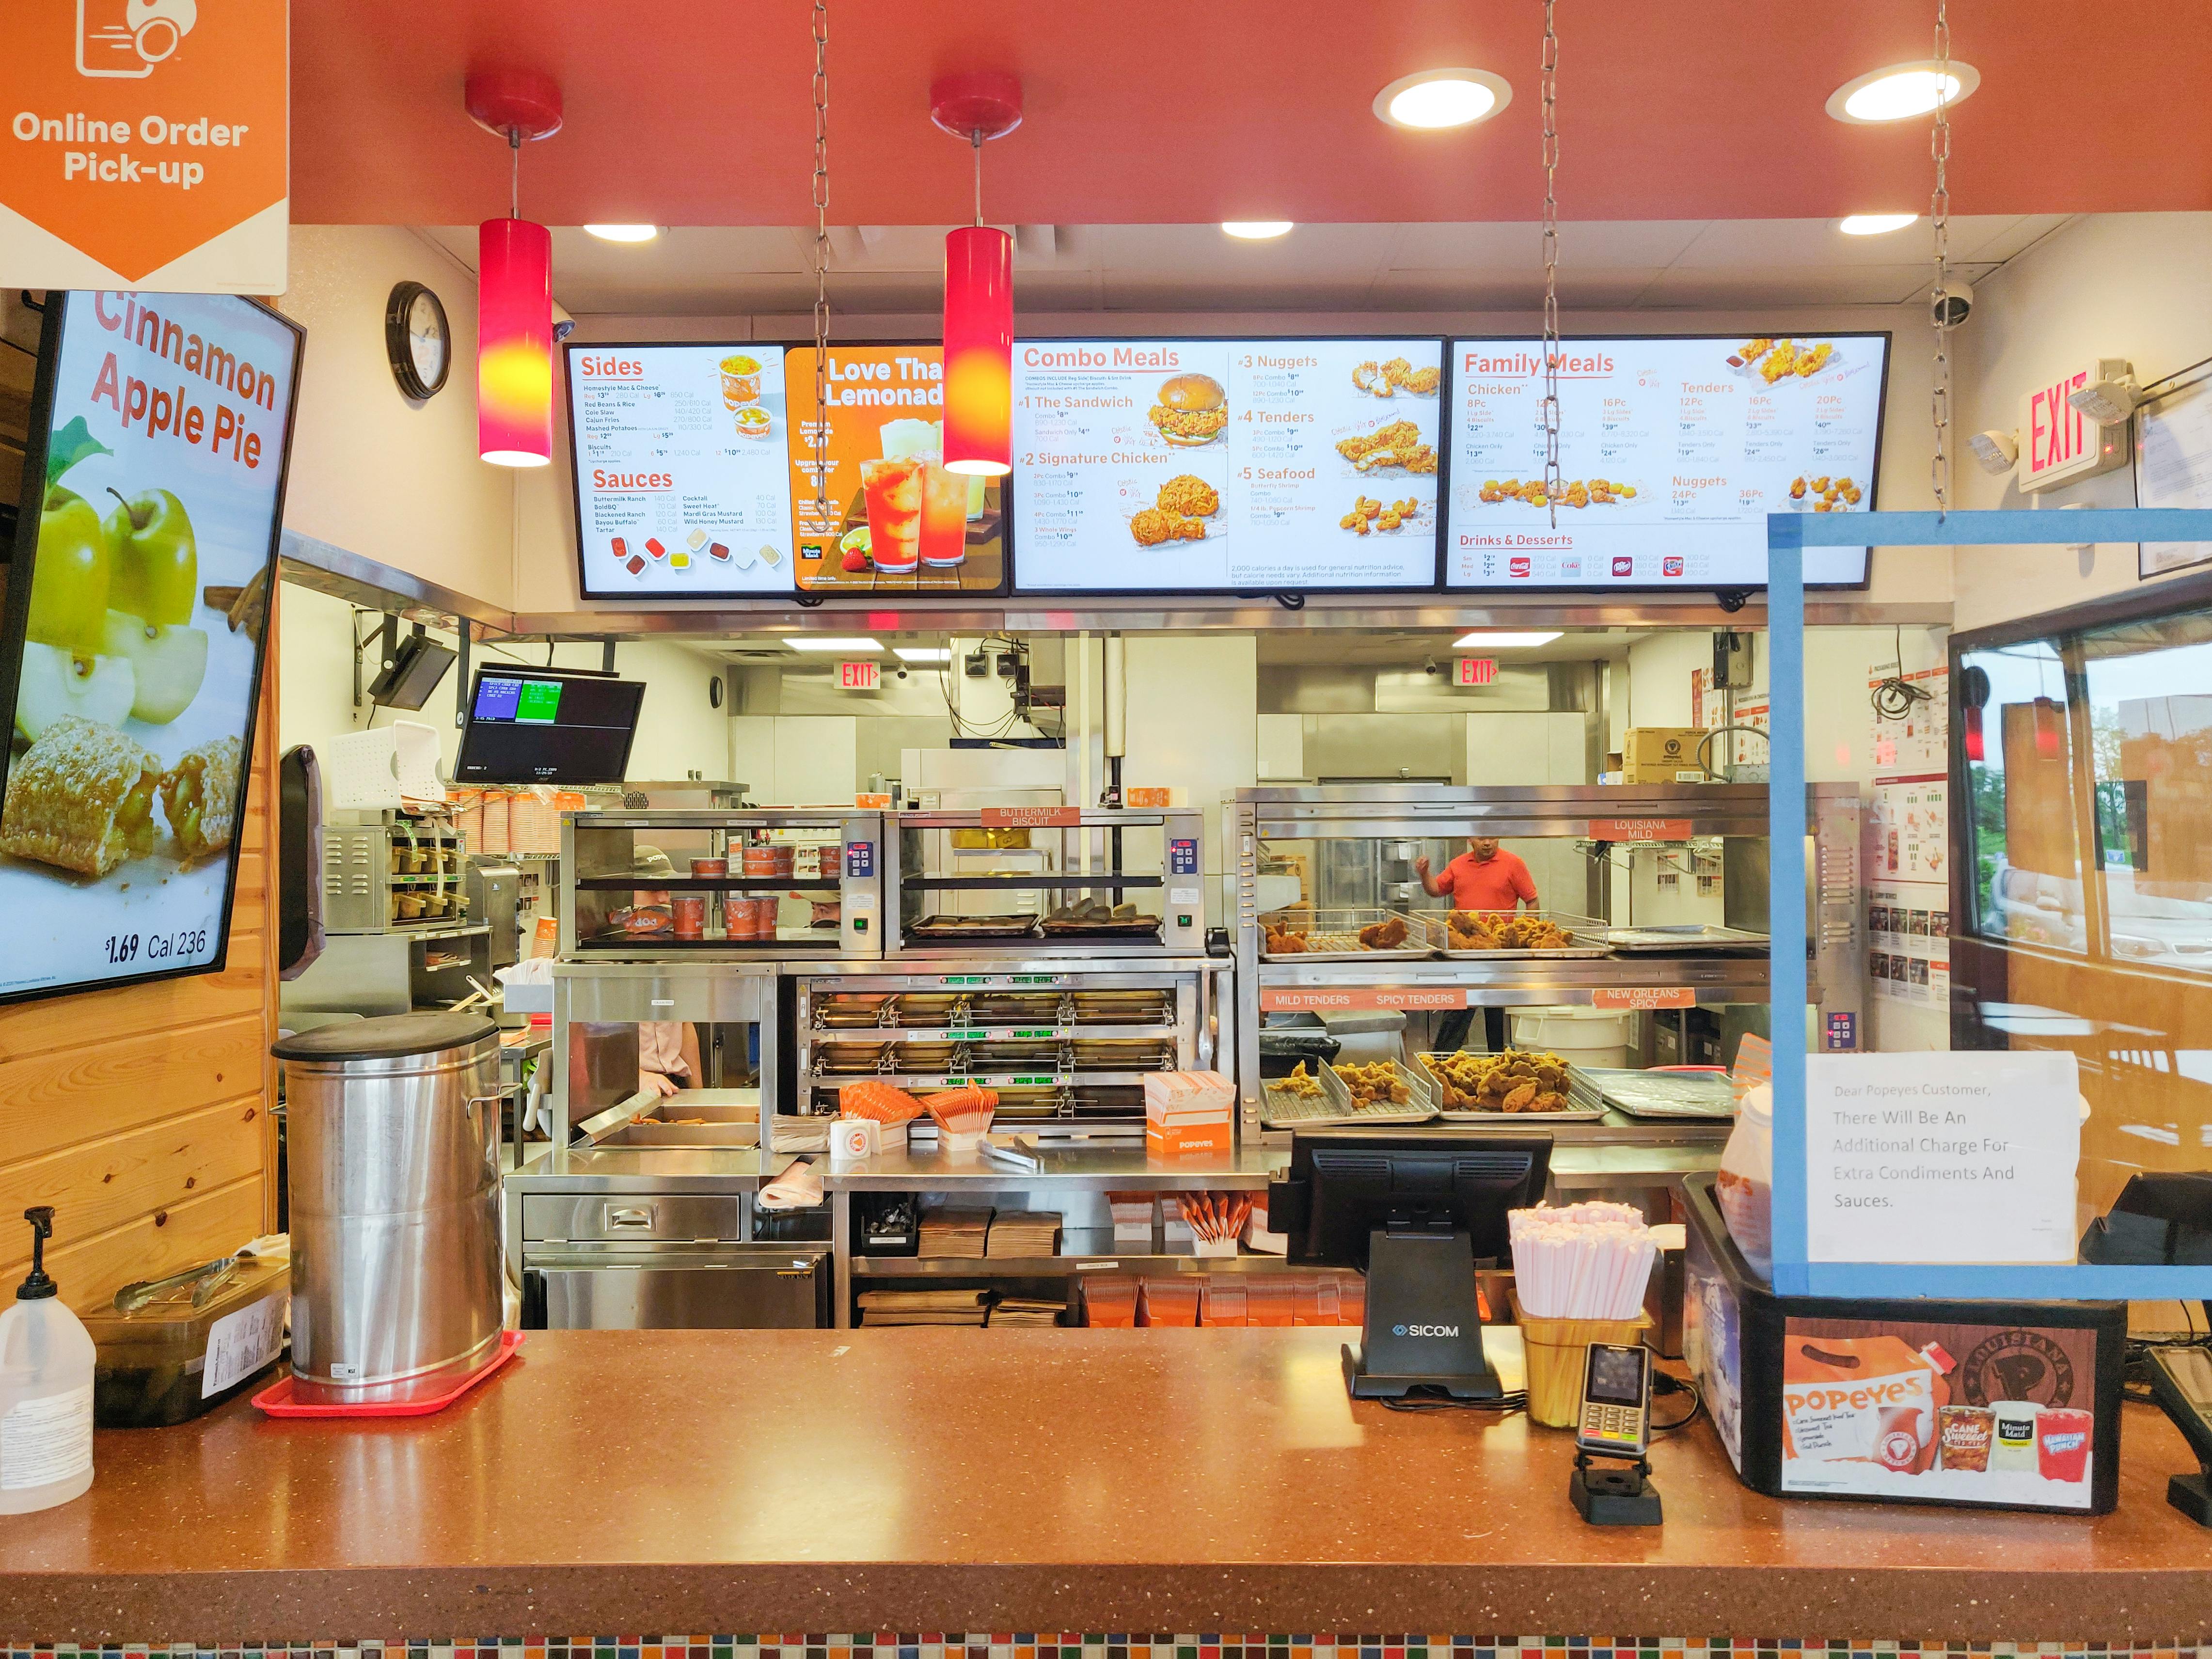 Popeyes checkout counter with kitchen and menu in background